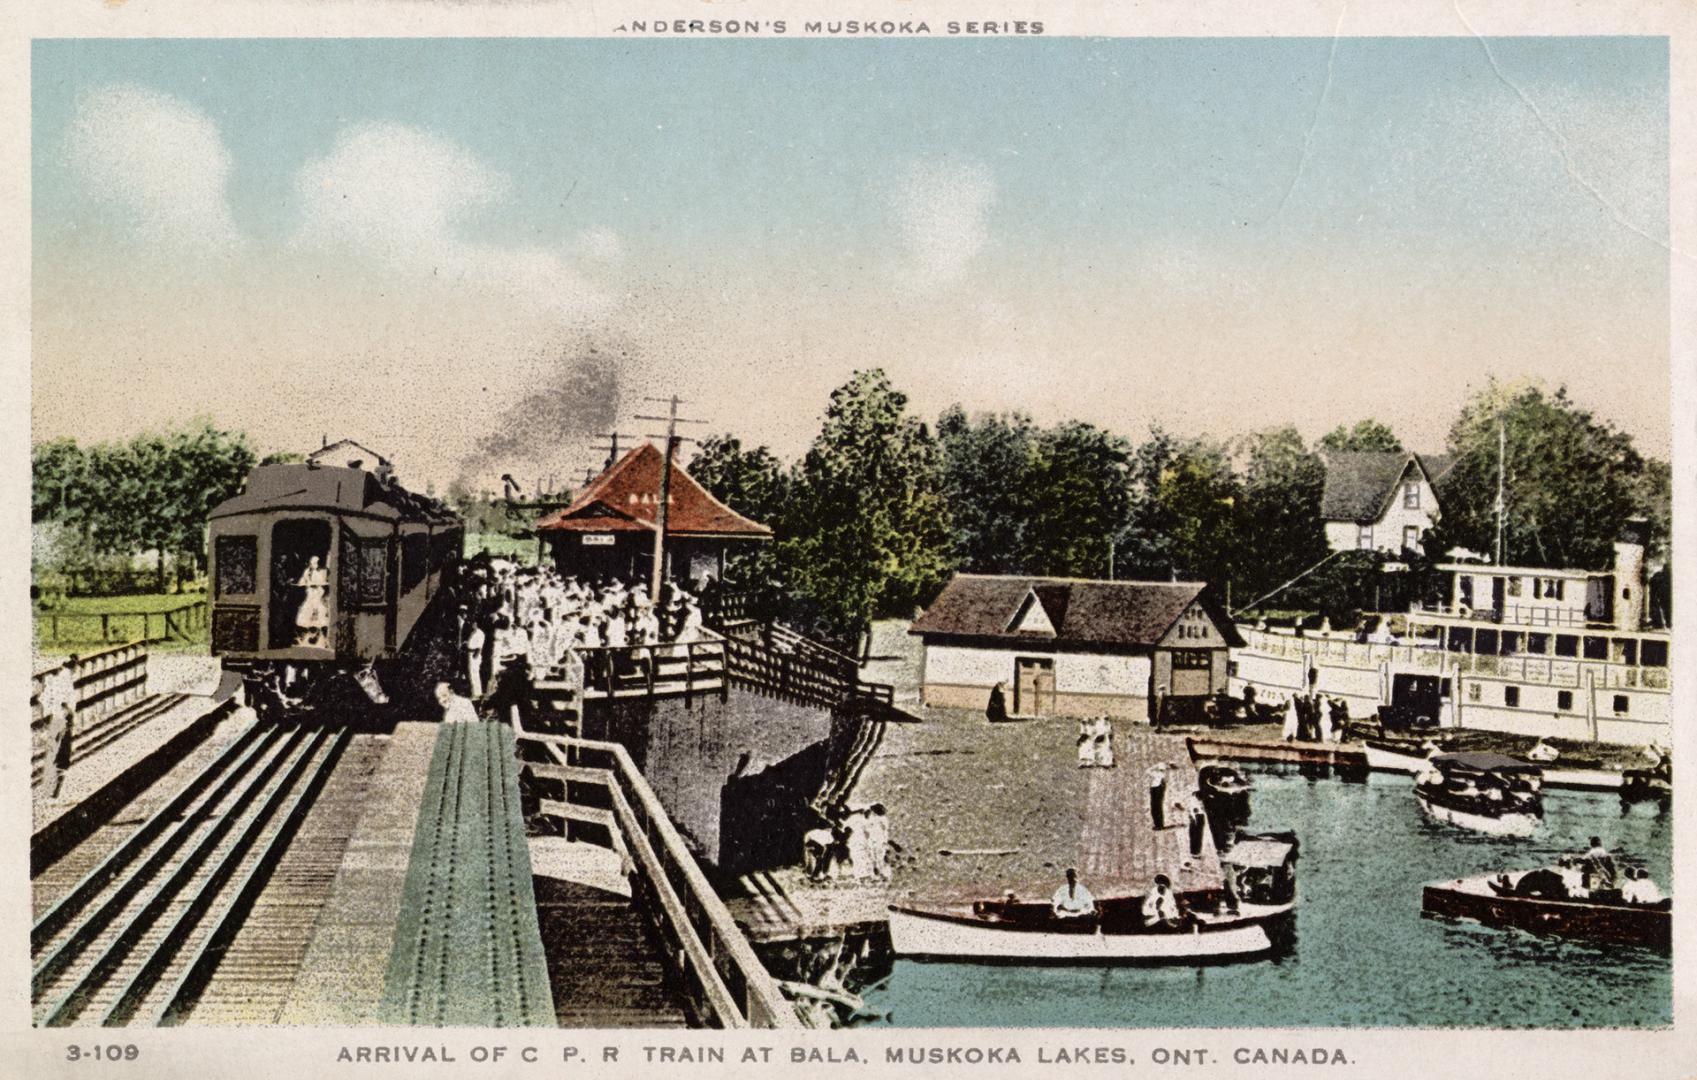 Picture of a train arriving at a station next to a wharf with boats